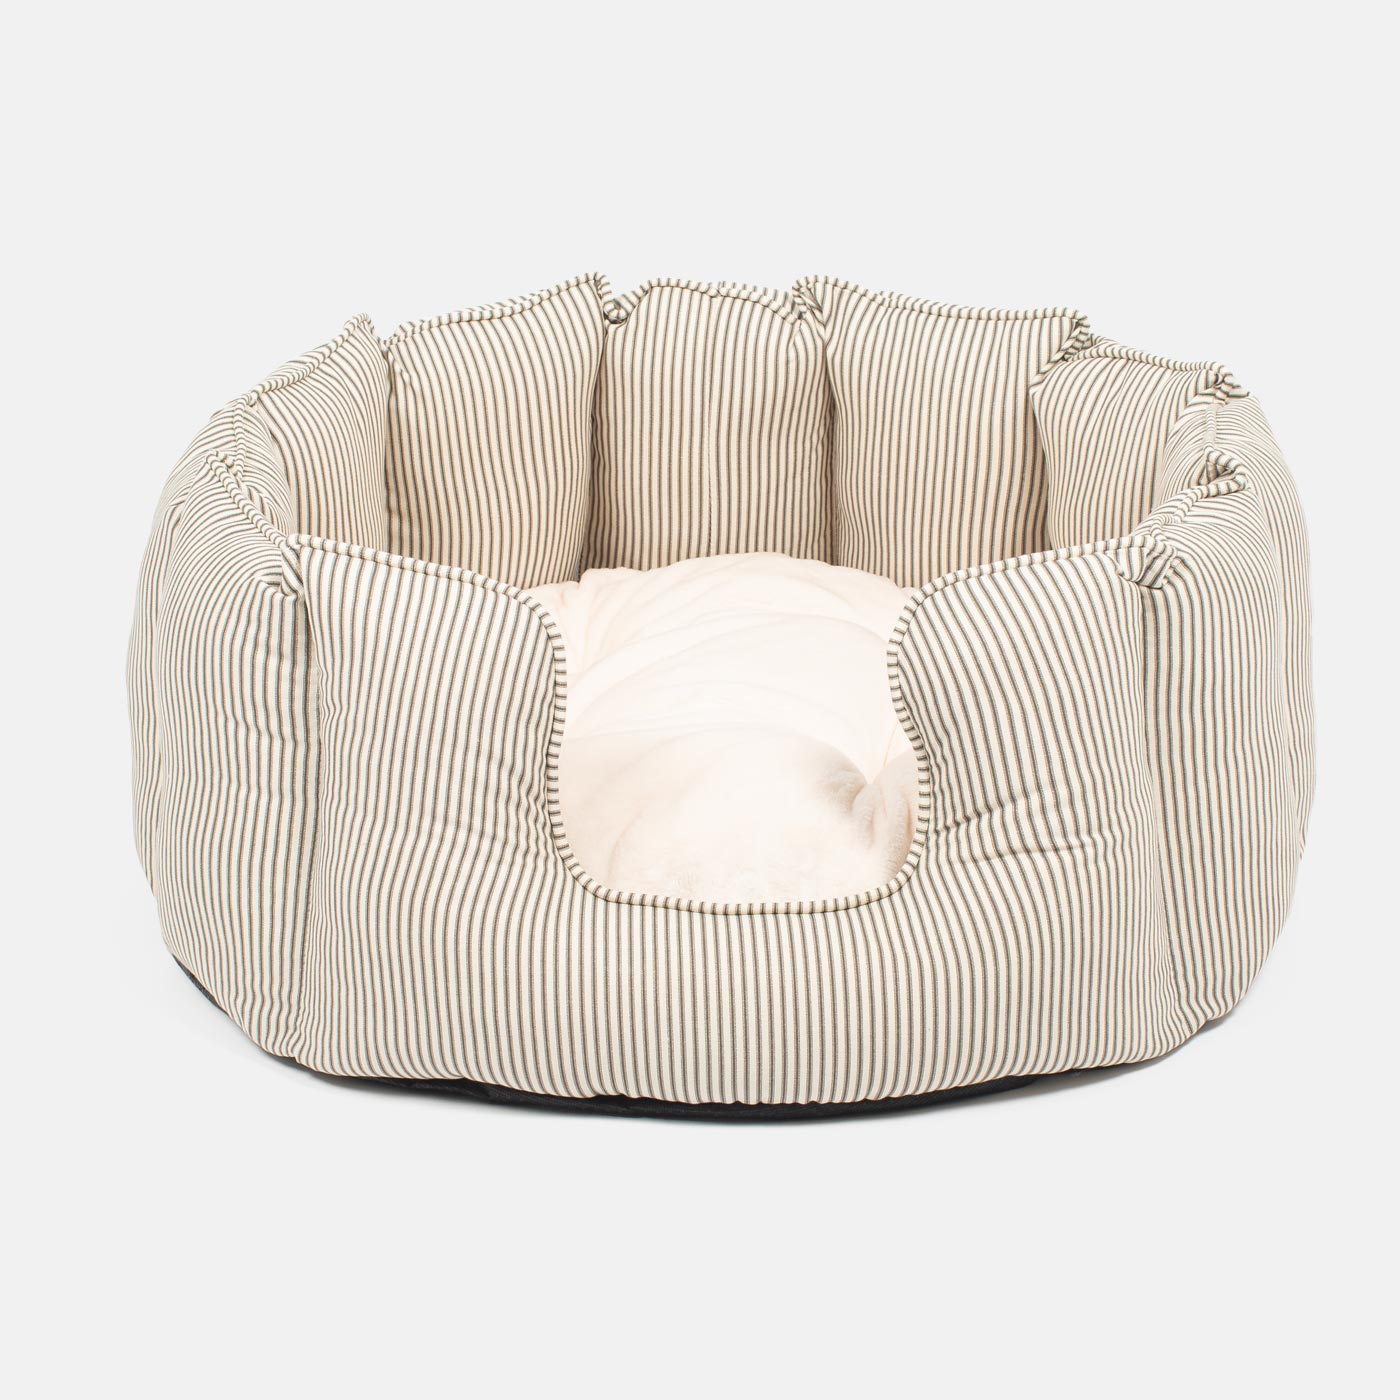 Discover Our Luxurious High Wall Bed For Dogs & Puppies, Featuring Reversible Inner Cushion With Teddy Fleece To Craft The Perfect Dog Bed In Stunning Regency Stripe! Available To Personalise Now at Lords & Labradors 